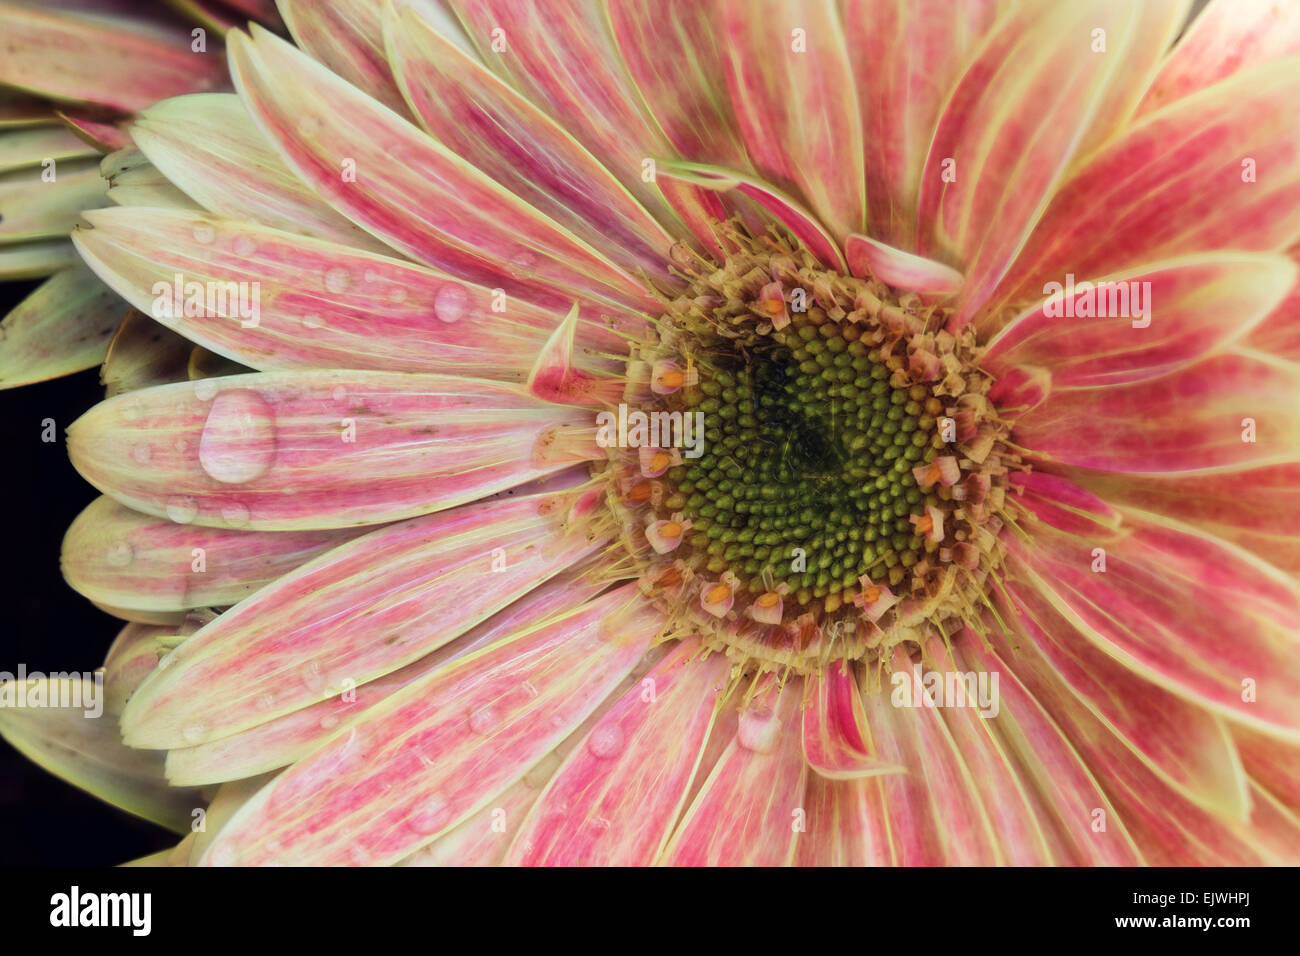 A pink and cream colored close up of a Gerbera dasiy after some rain. Stock Photo